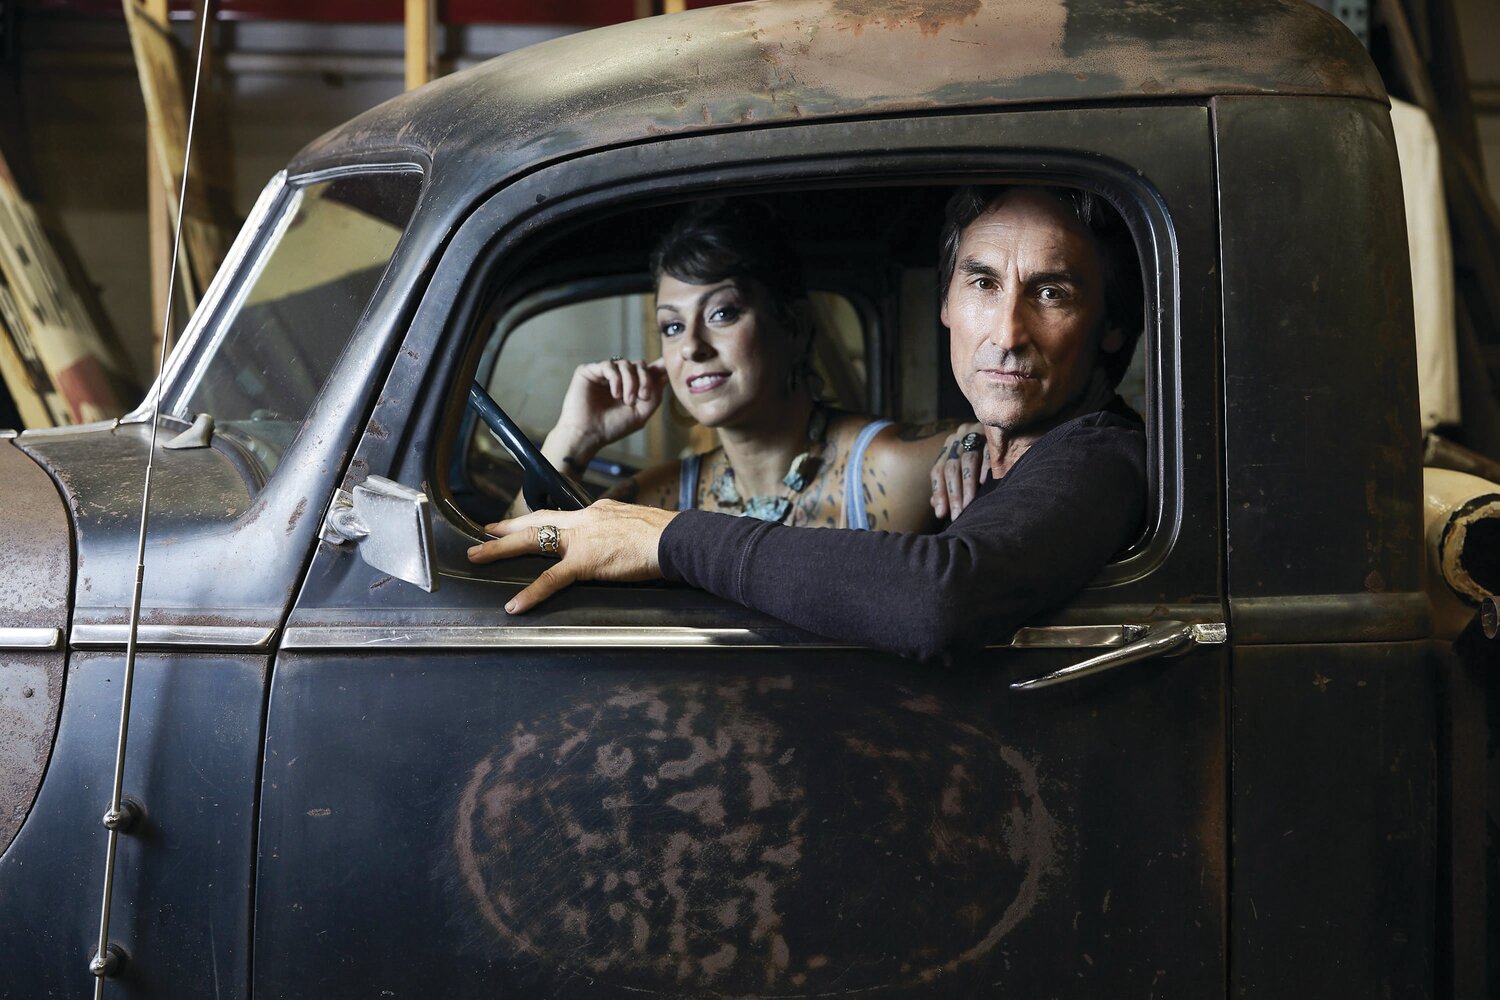 AMERICAN PICKERS: Mike Wolfe and Danielle Colby are looking for Ocean State collectors who want to show off their collections and shed a few items. According to the show’s producers, the “American Pickers are looking for large, rare collections and things they’ve never seen before.”